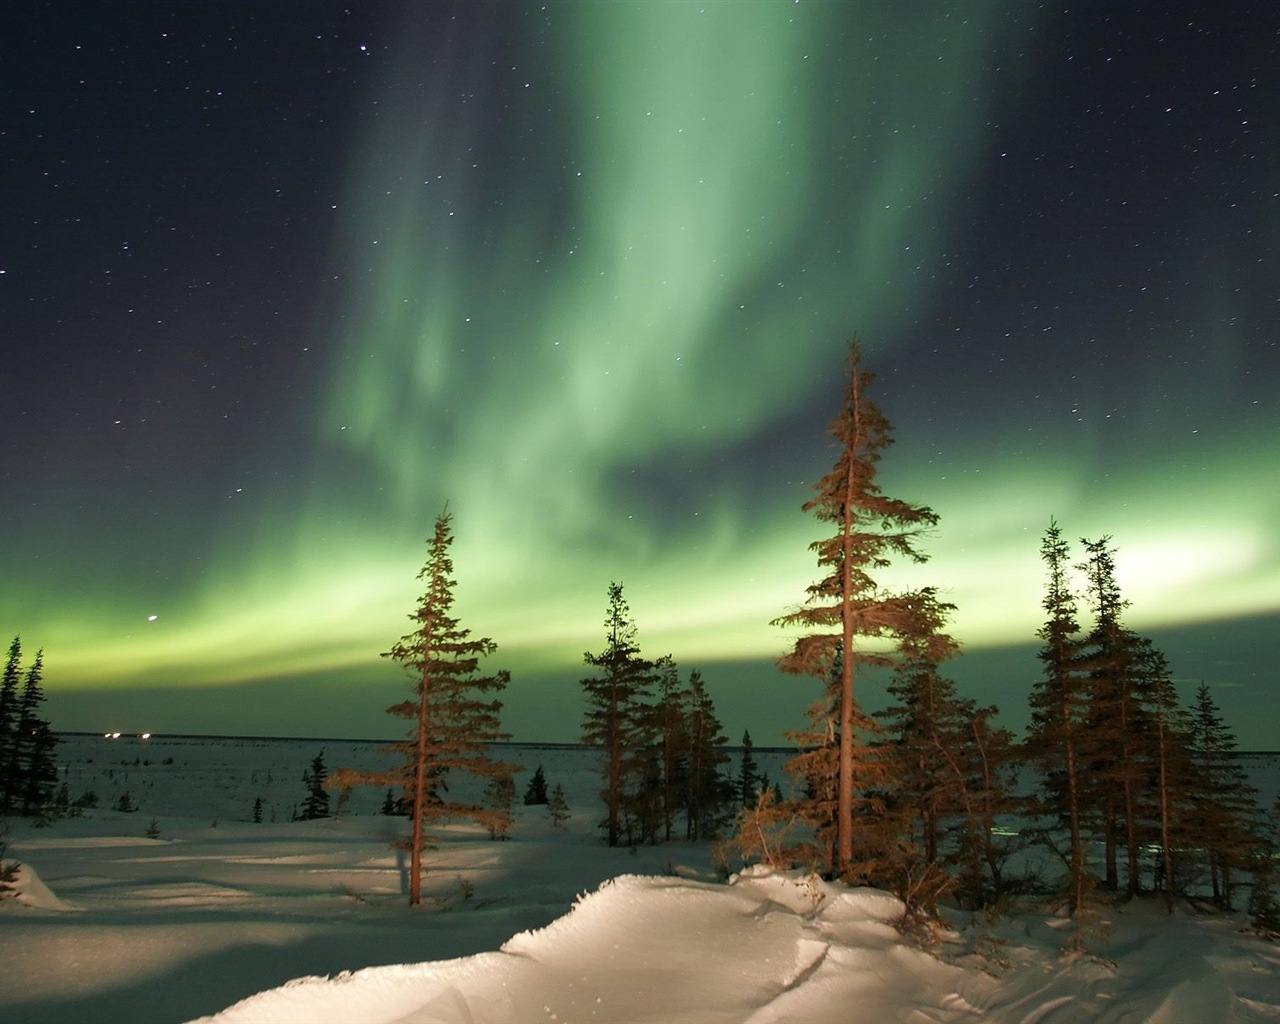 Natural wonders of the Northern Lights HD Wallpaper (2) #3 - 1280x1024